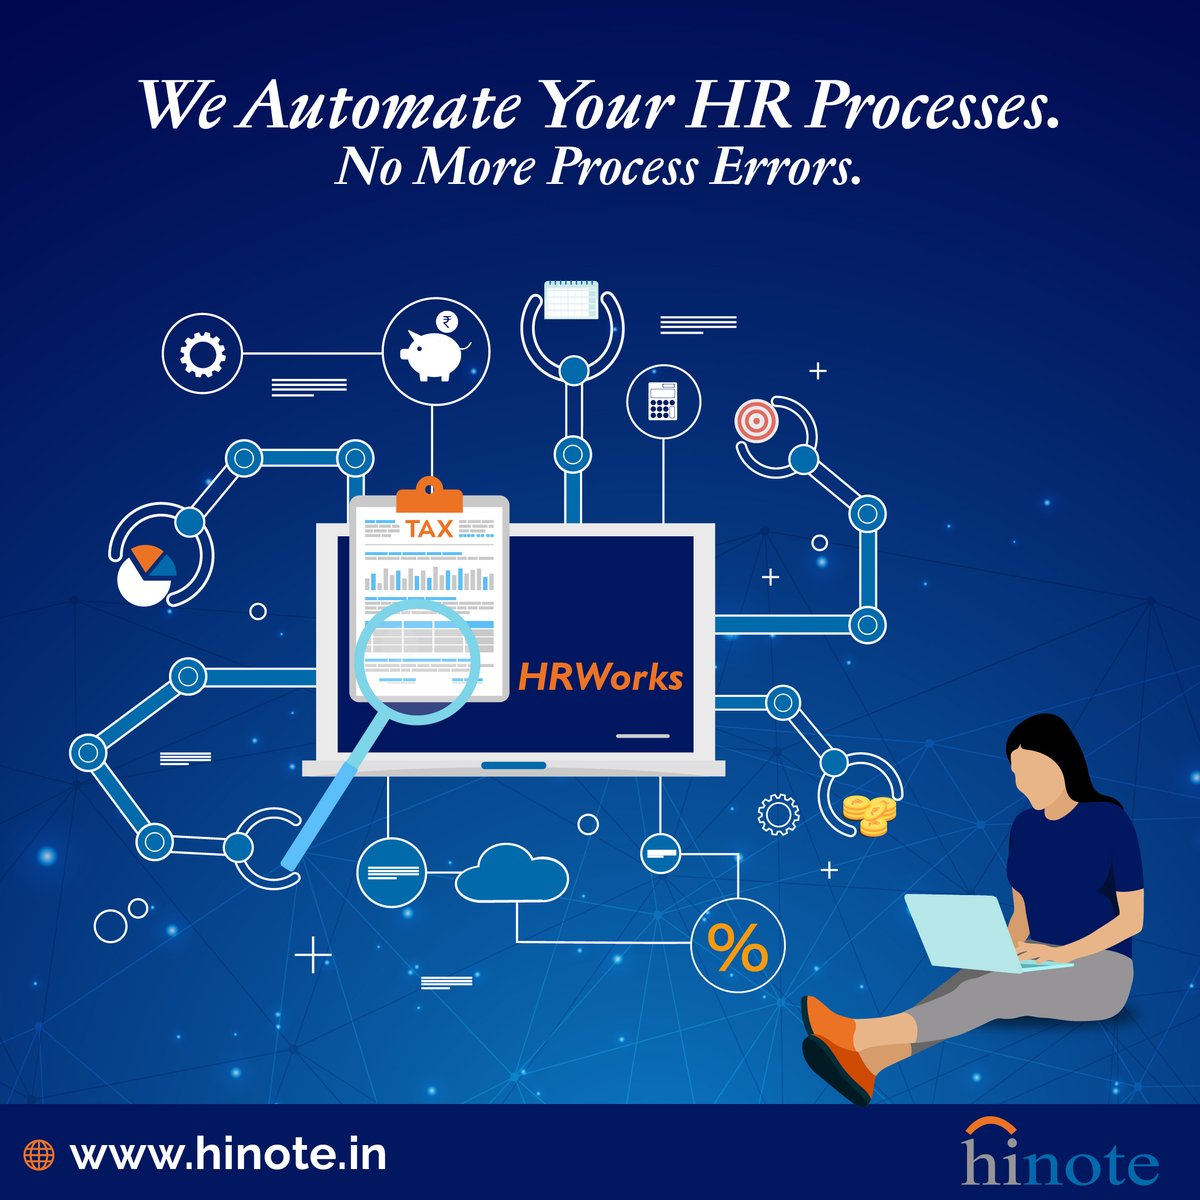 HRWorks lets you have an automated and error-free payroll process.

 ☎️ +91 98400 55040 | 🌐 hinote.in

#Payroll #EmployeeManagement #Hinote #PayrollProcess #HRWorks #PayrollMistakes #PayrollErrors #AutomatedError #HRProcesses #PayrollServices